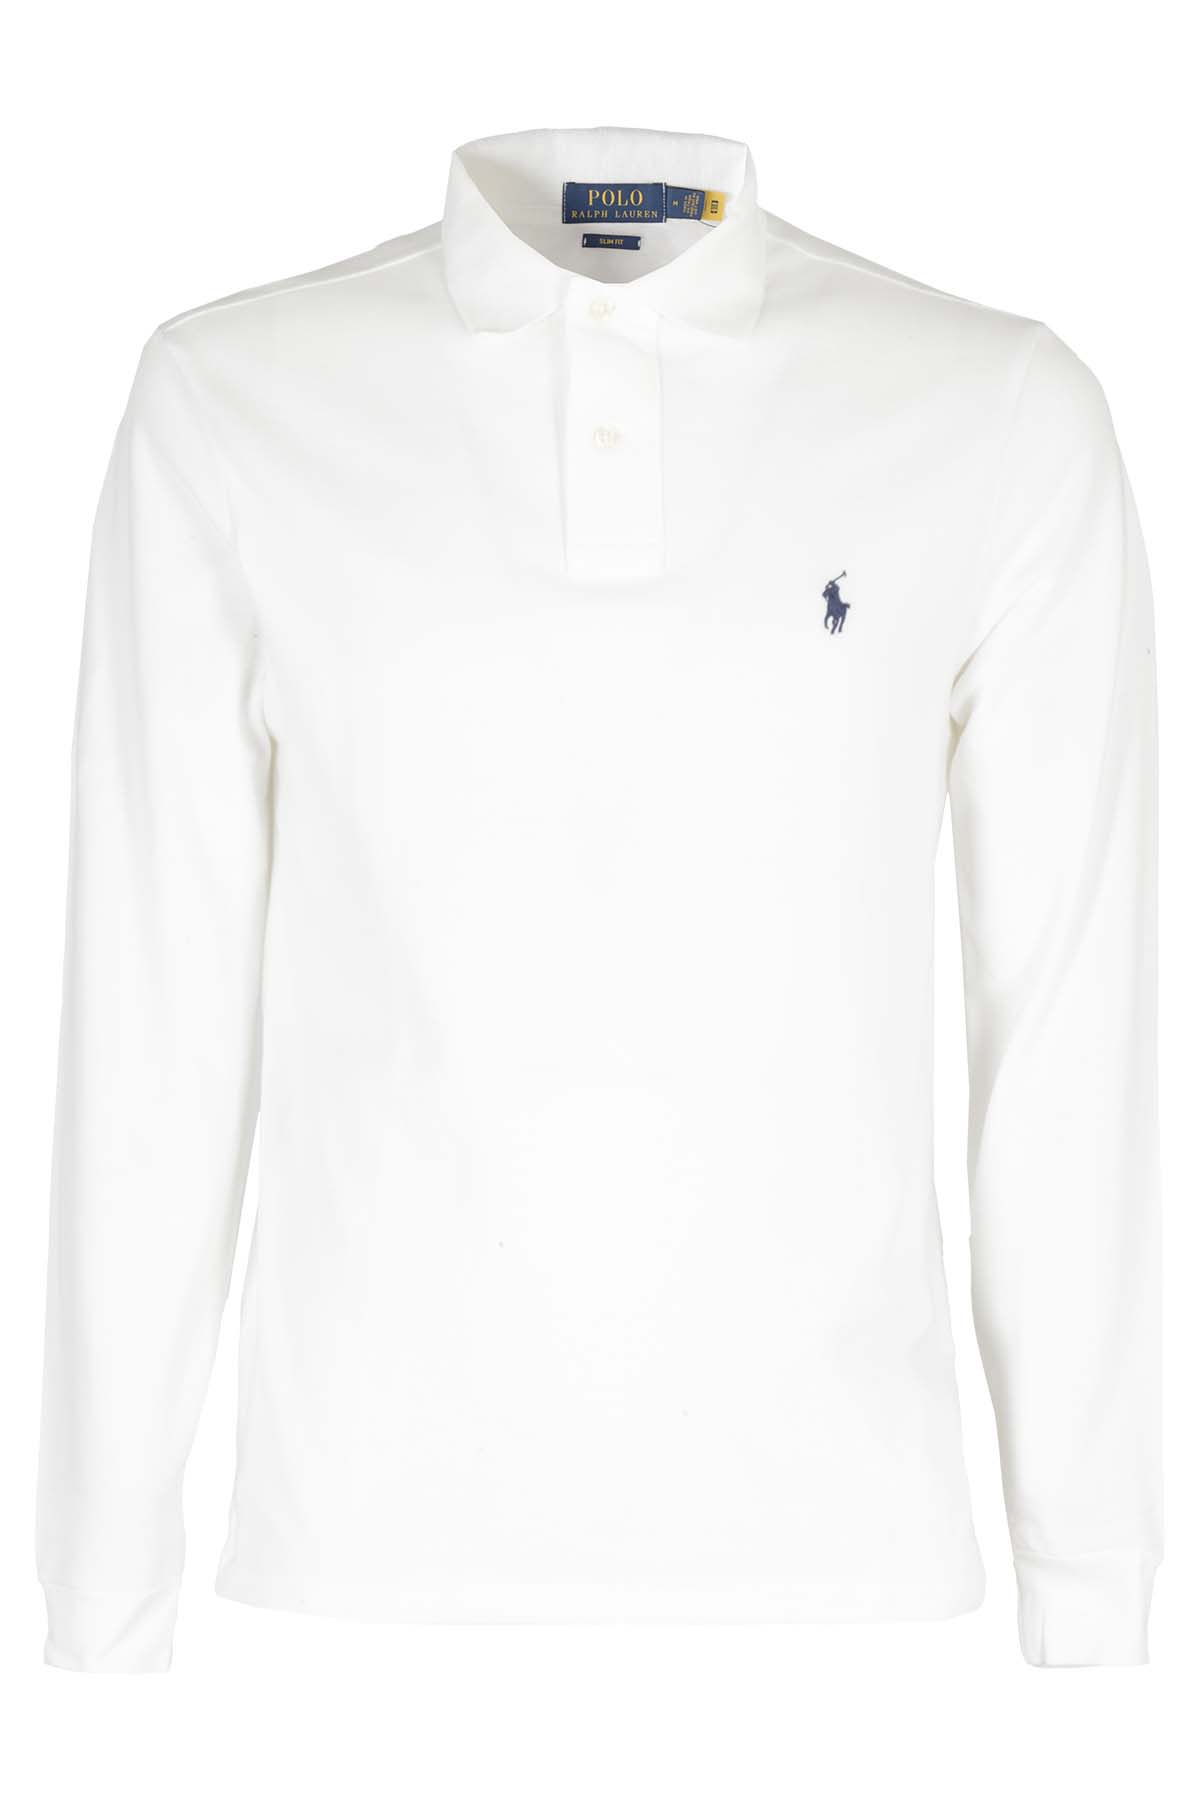 White Long-sleeved Slim Fit Polo Shirt